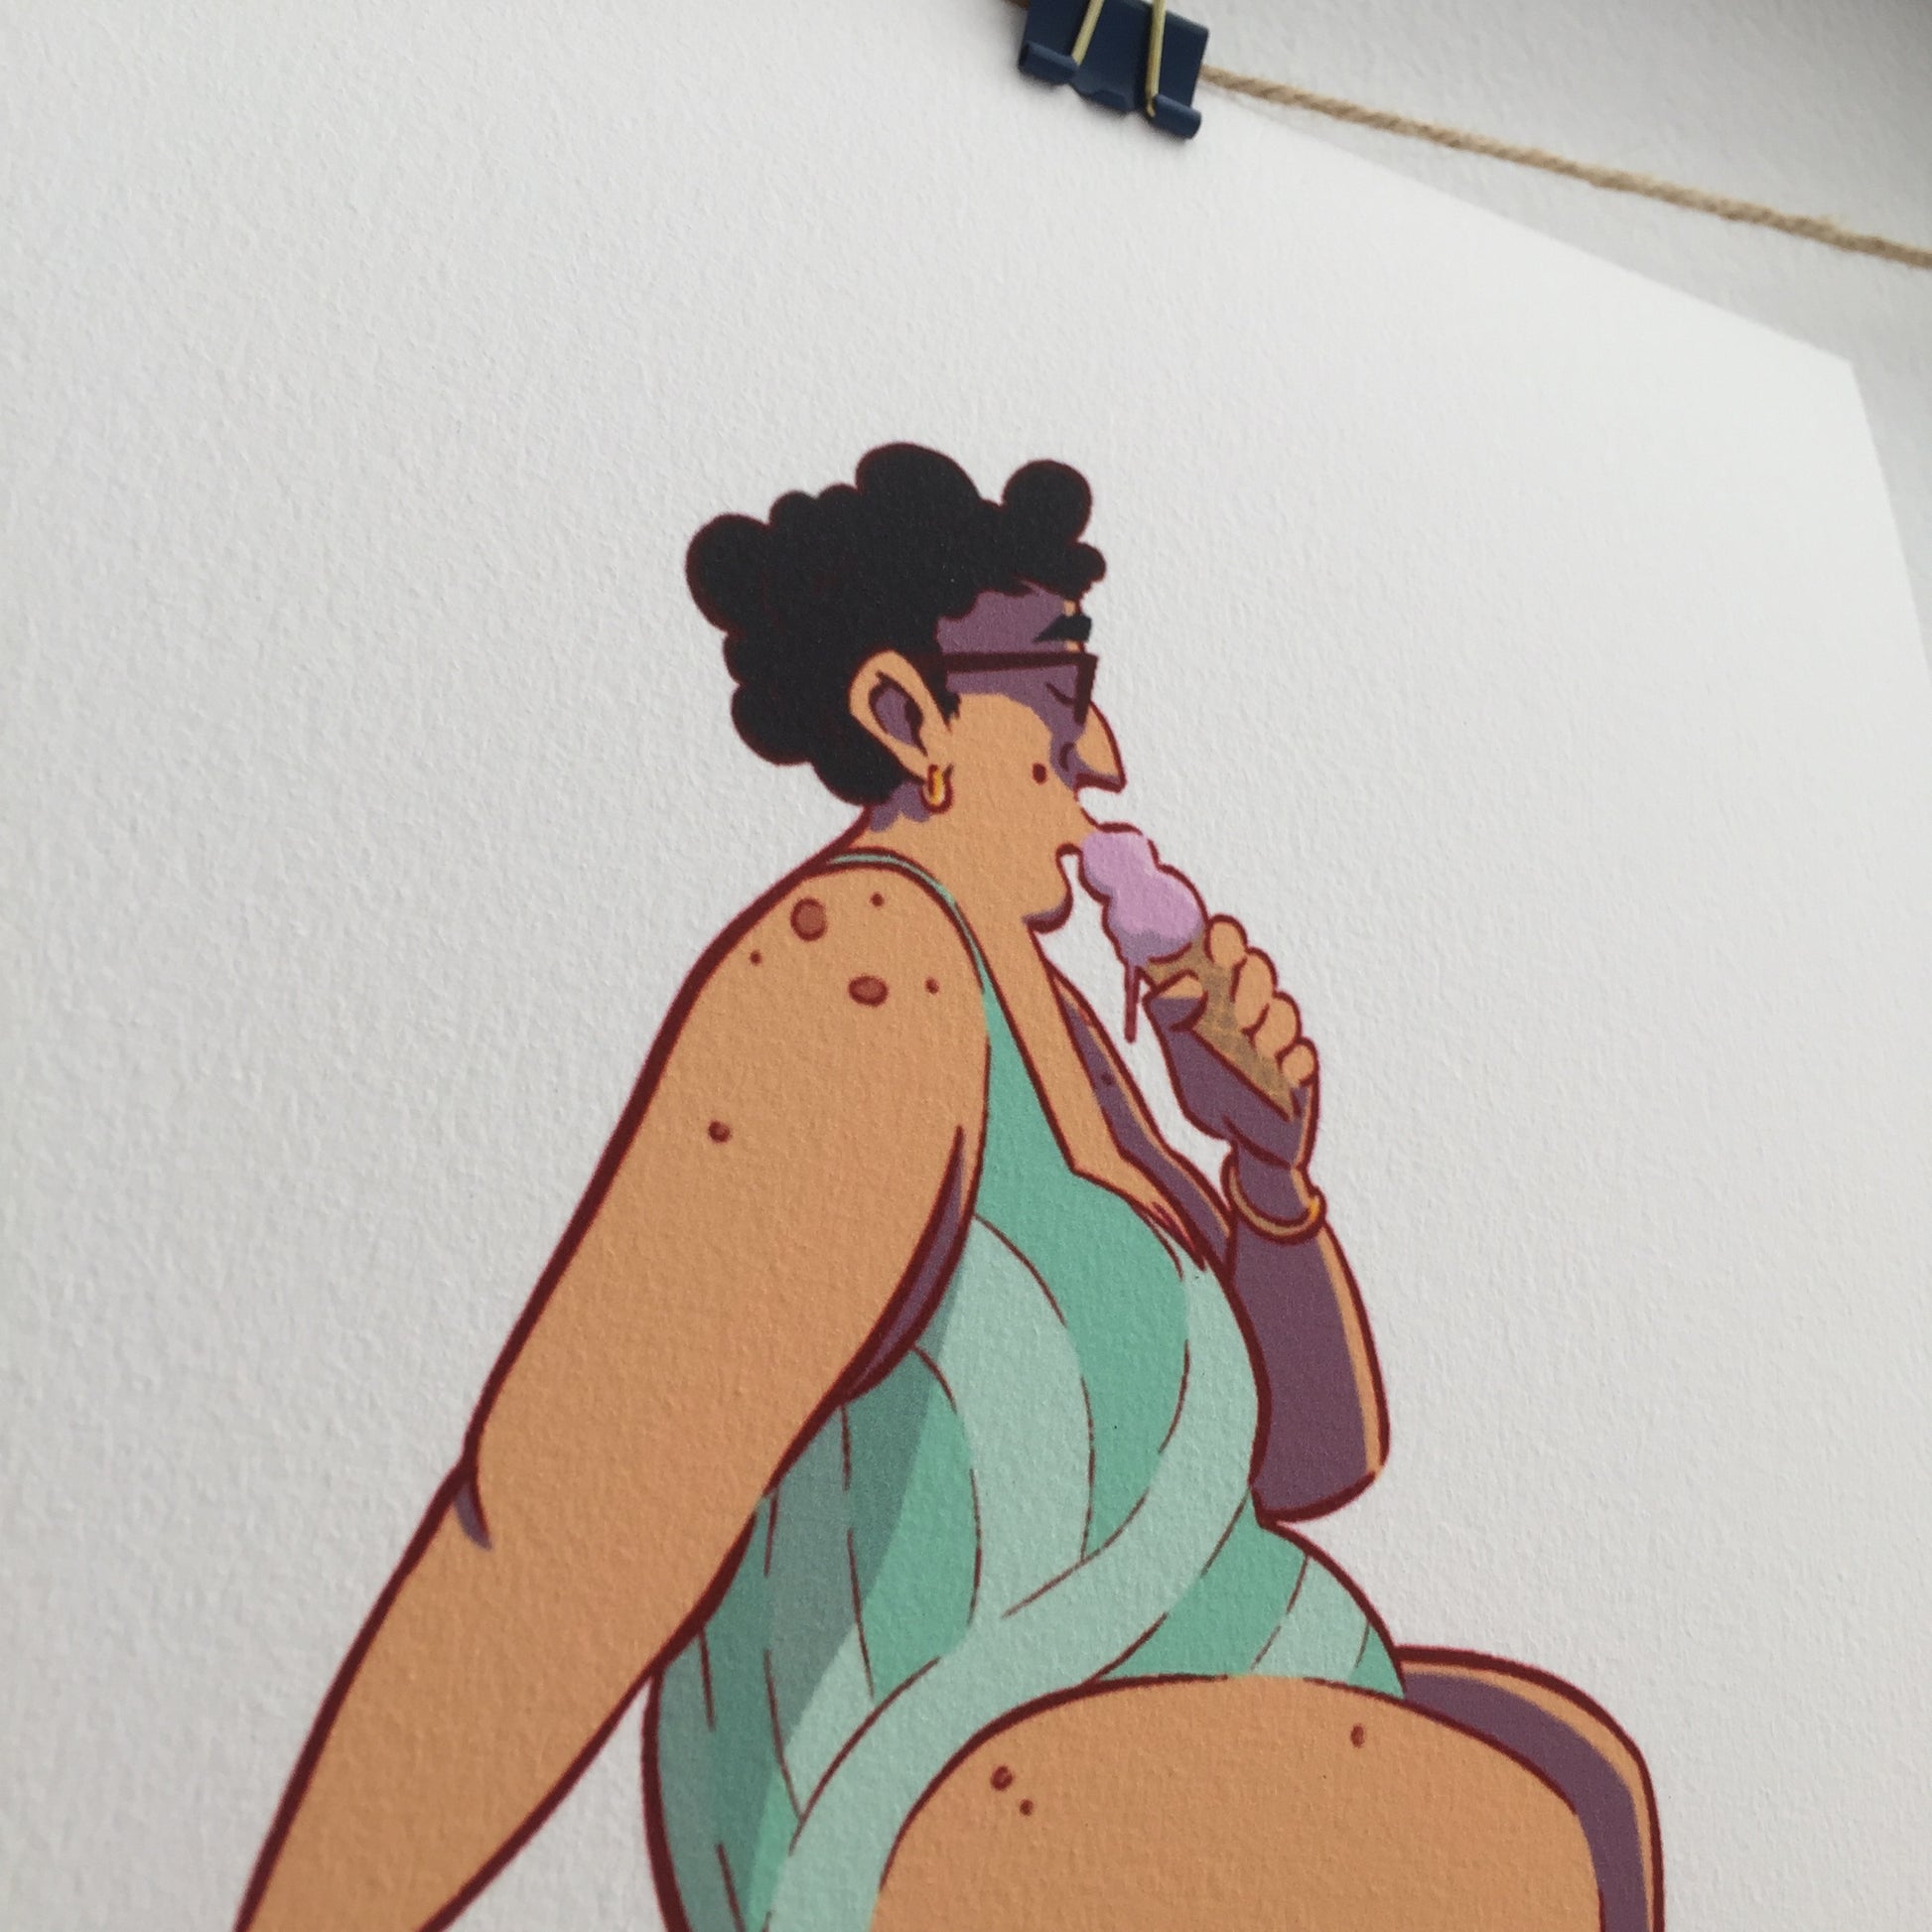 Close up of the lady. The ice cream that she's in eatinf is kind of pink and she's wearing a one piece bathing suit with straps and turquoise colors. She's has golden earings and bracelet.